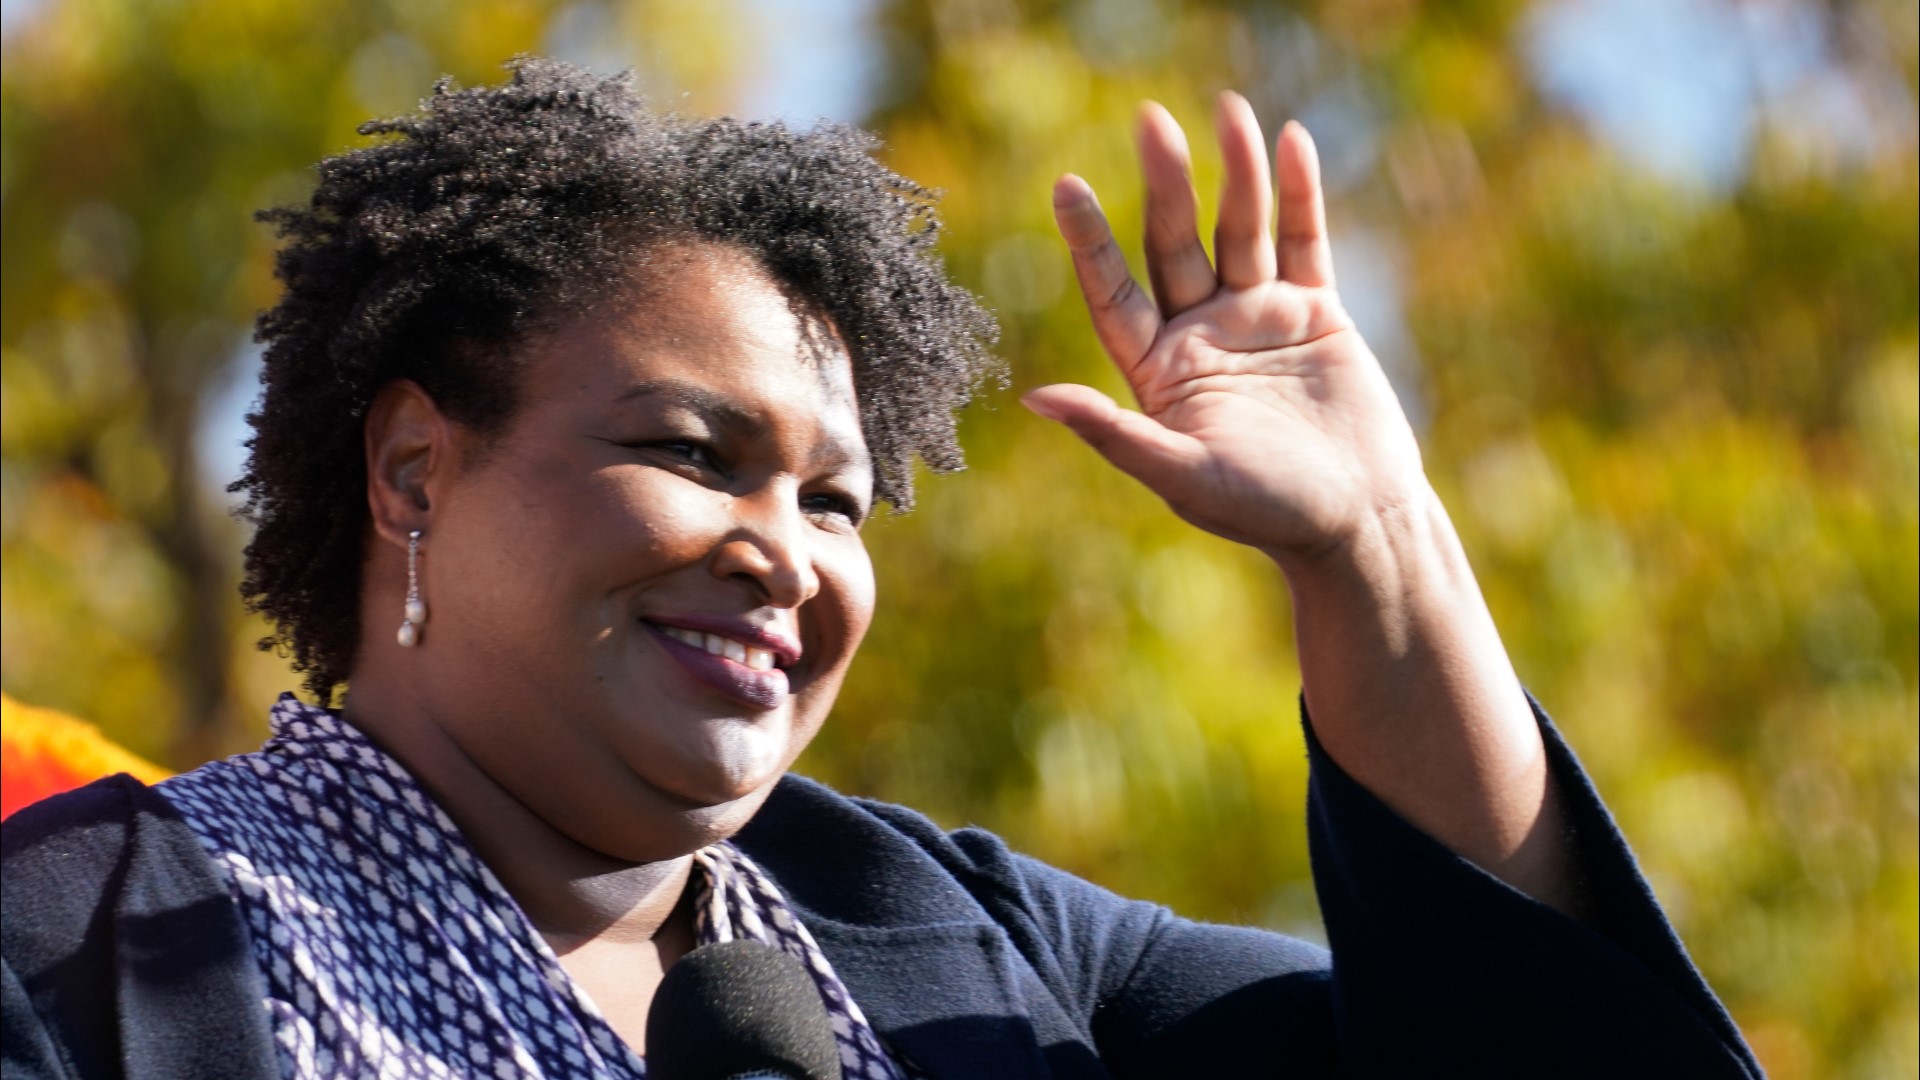 Stacey Abrams has announced she will launch another campaign to become the nation's first Black woman governor.